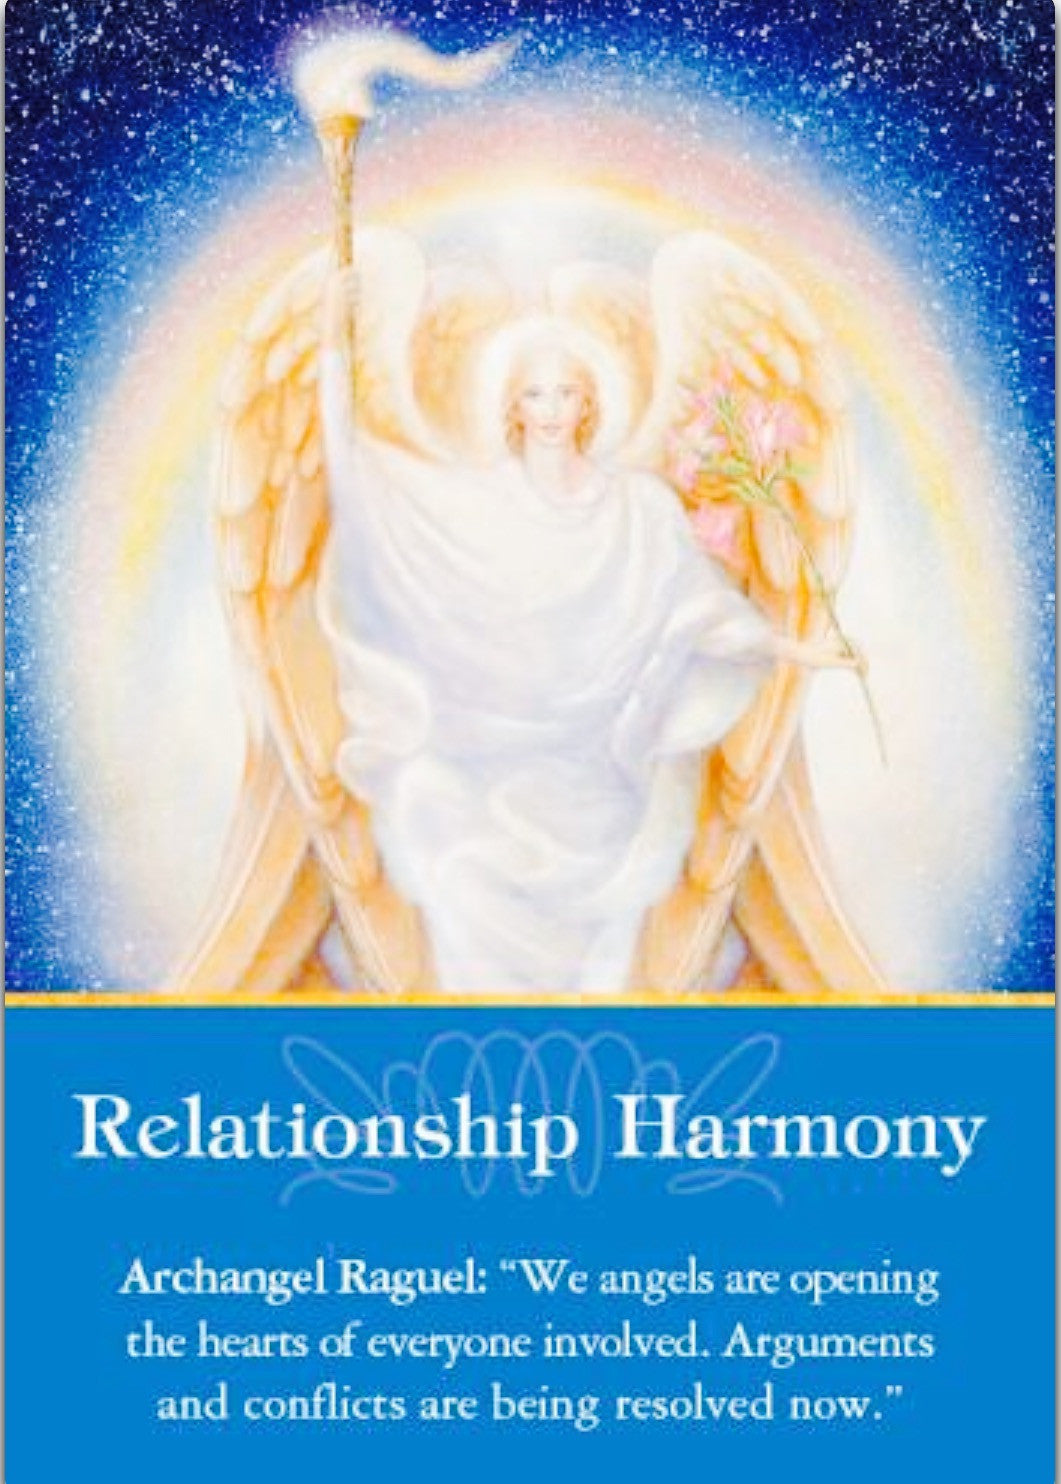 Archangel Raguel: “We angels are opening the hearts of everyone involved. Arguments and conflicts are being resolved now.”